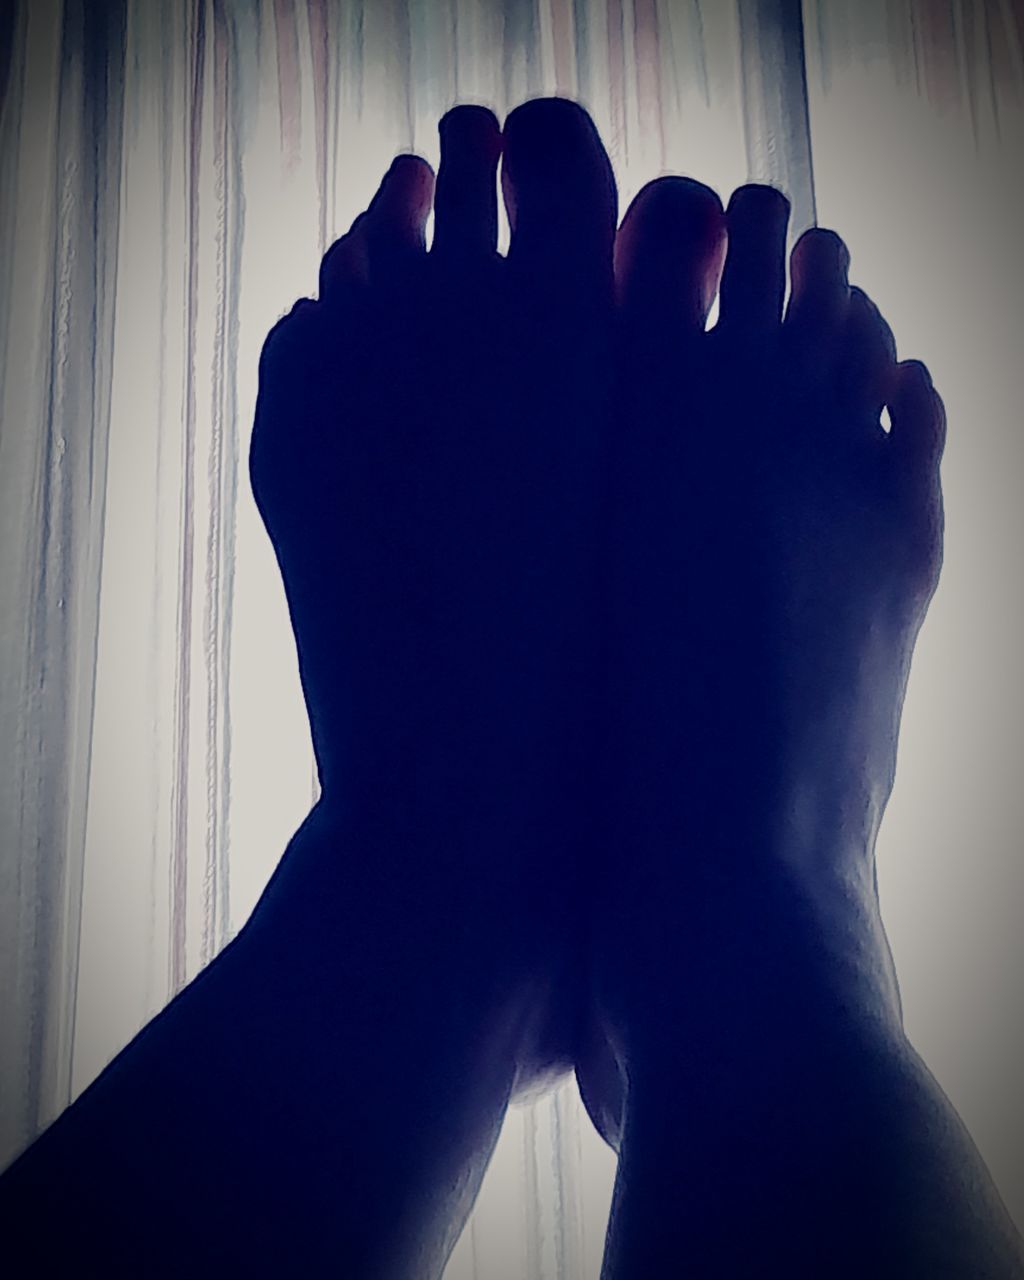 after a long day Feetselfie Feetish Feet Photography Feets In The Air Feetobsession Feetlove